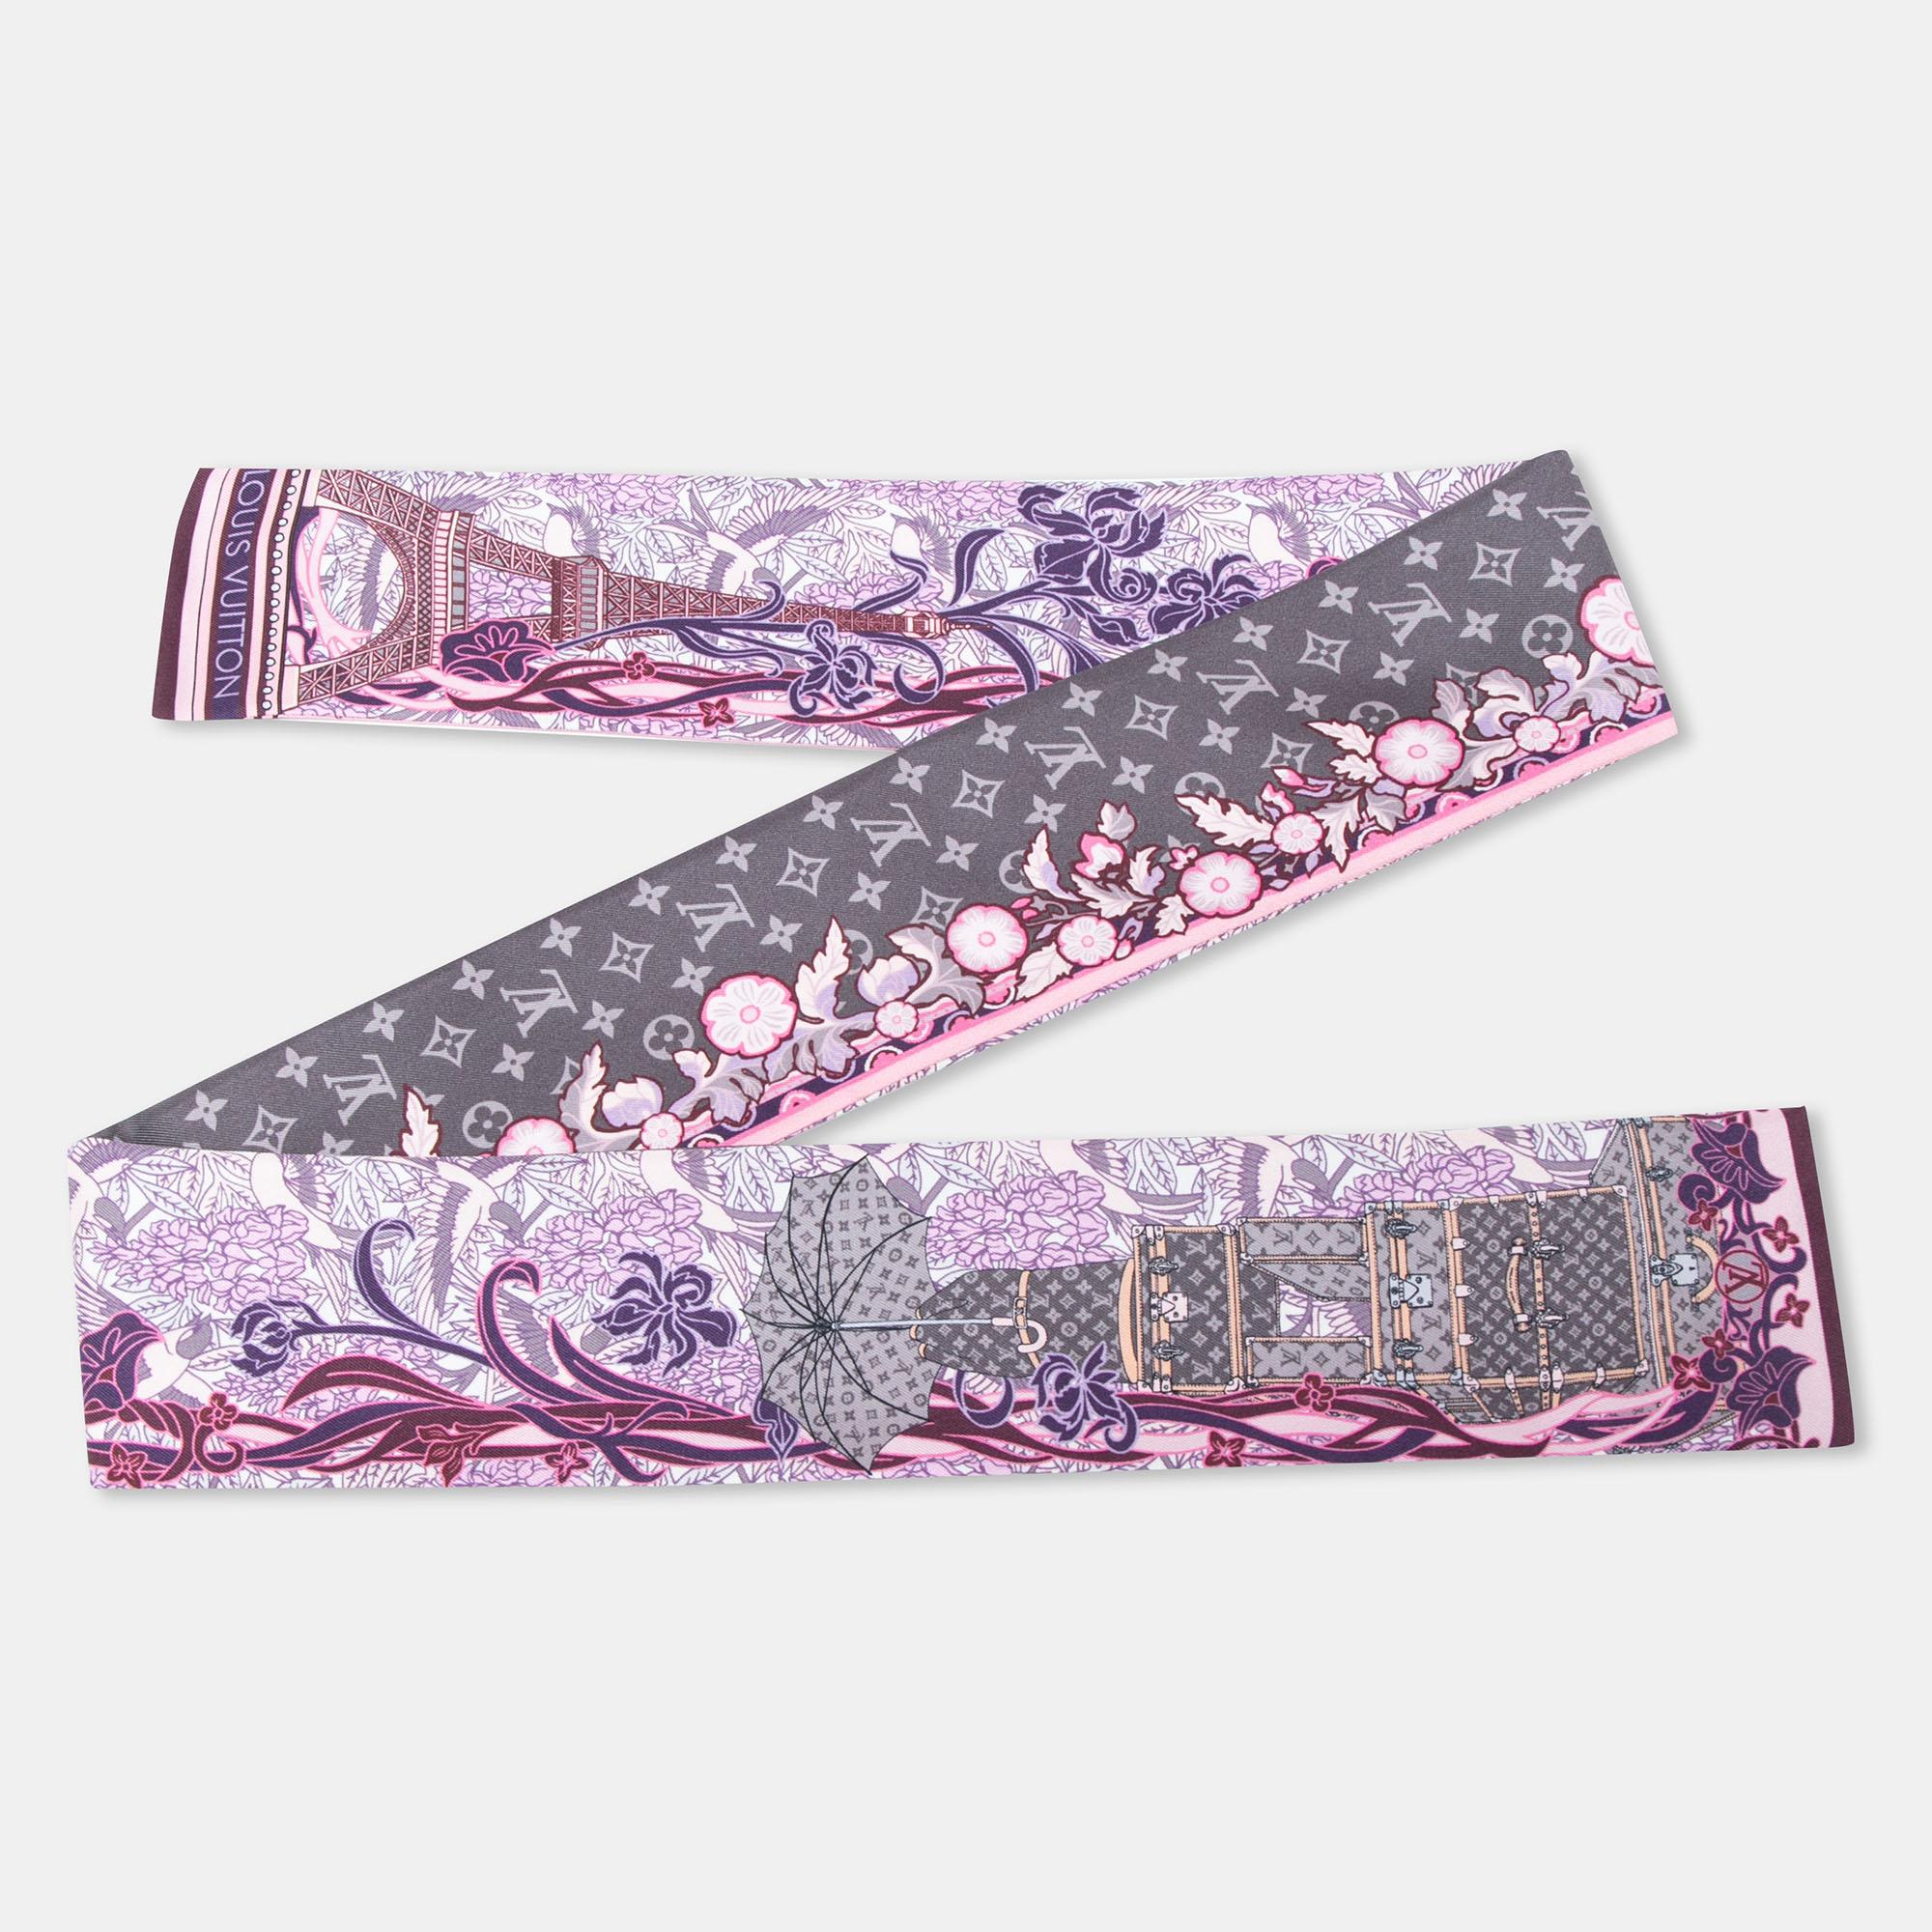 For a touch of class and sophistication, this beautiful bandeau scarf is the perfect accessory for every wardrobe. Made from silk, the creation is tinted in beautiful hues and also features the label's iconic monogram motifs. It is adorned with